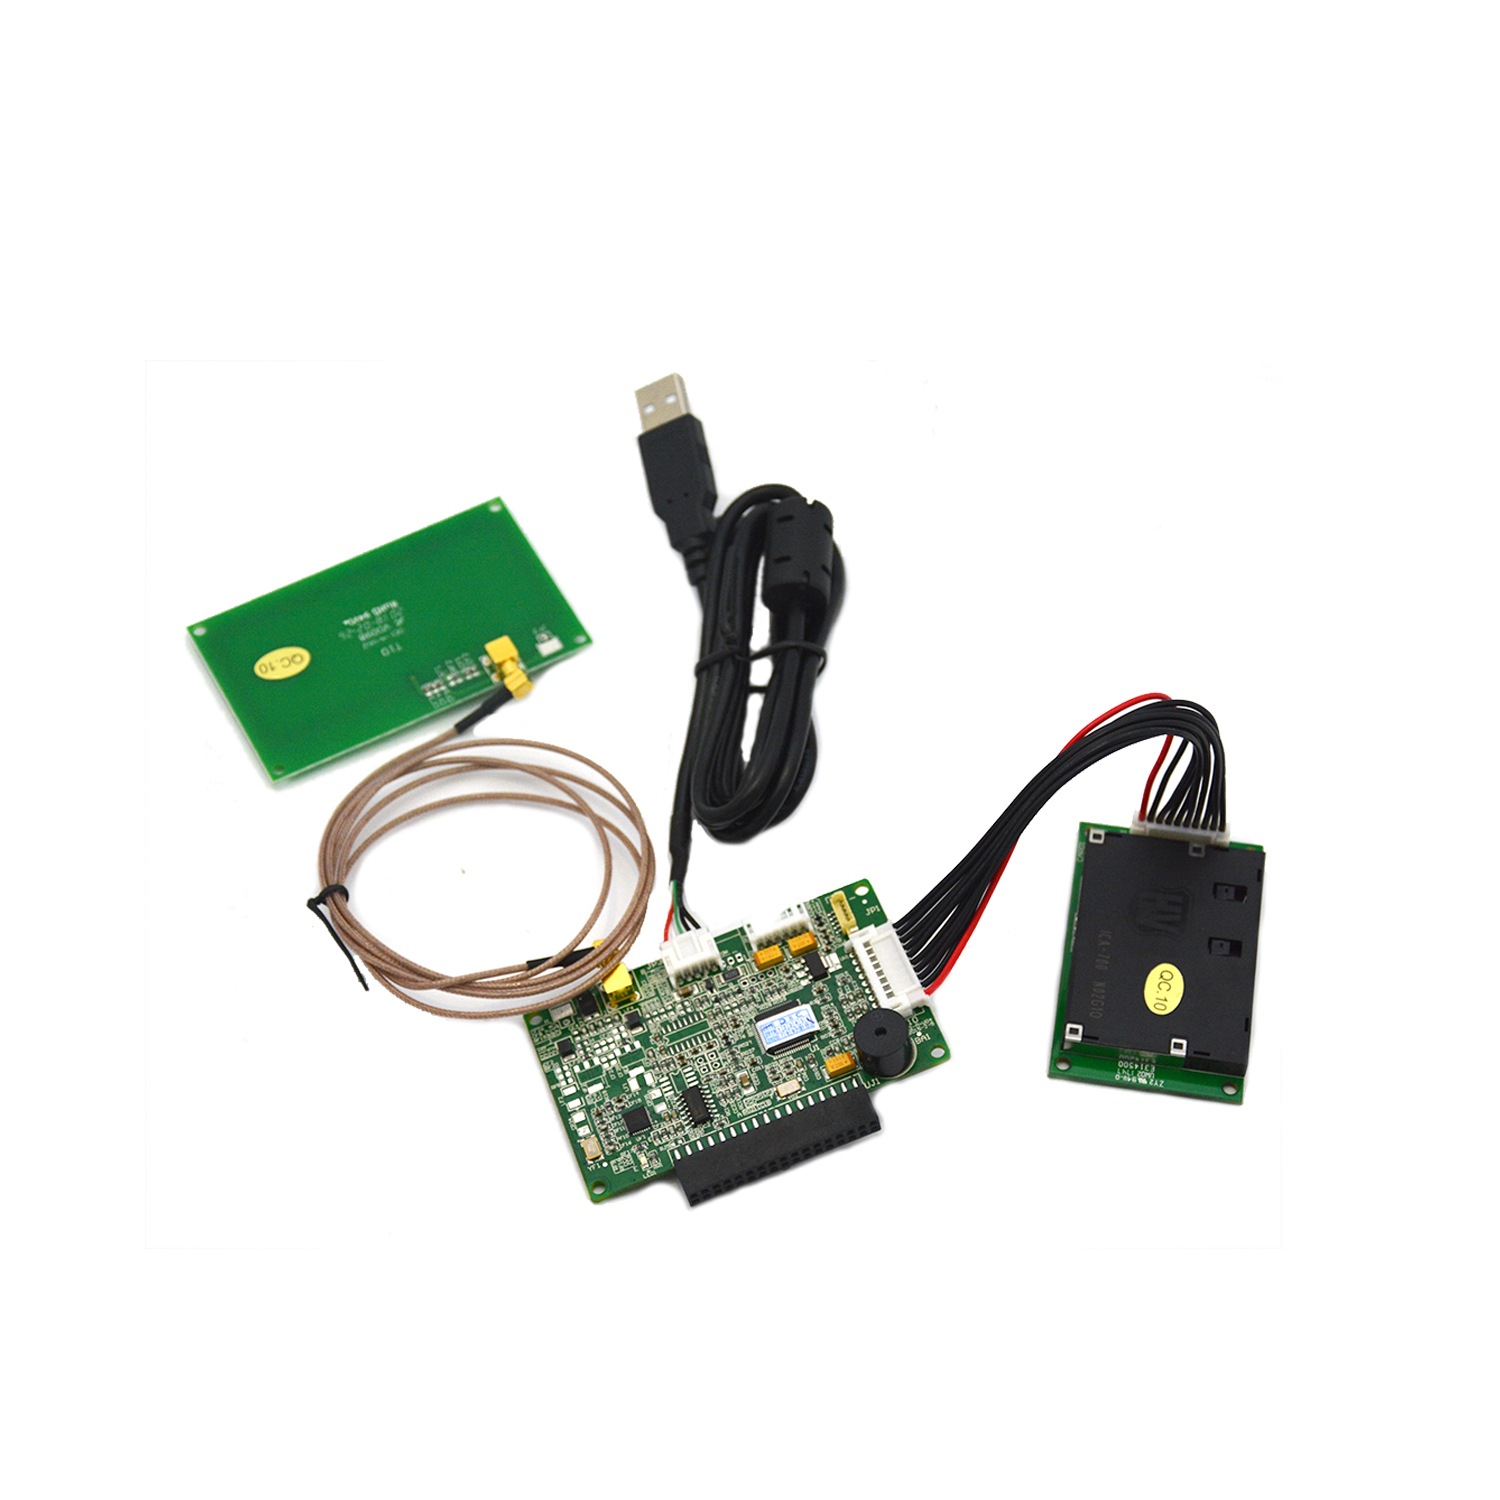 EMV L1 RFID MSR Contact Smart Card Reader Module for E-Payment HCC-T10-DC